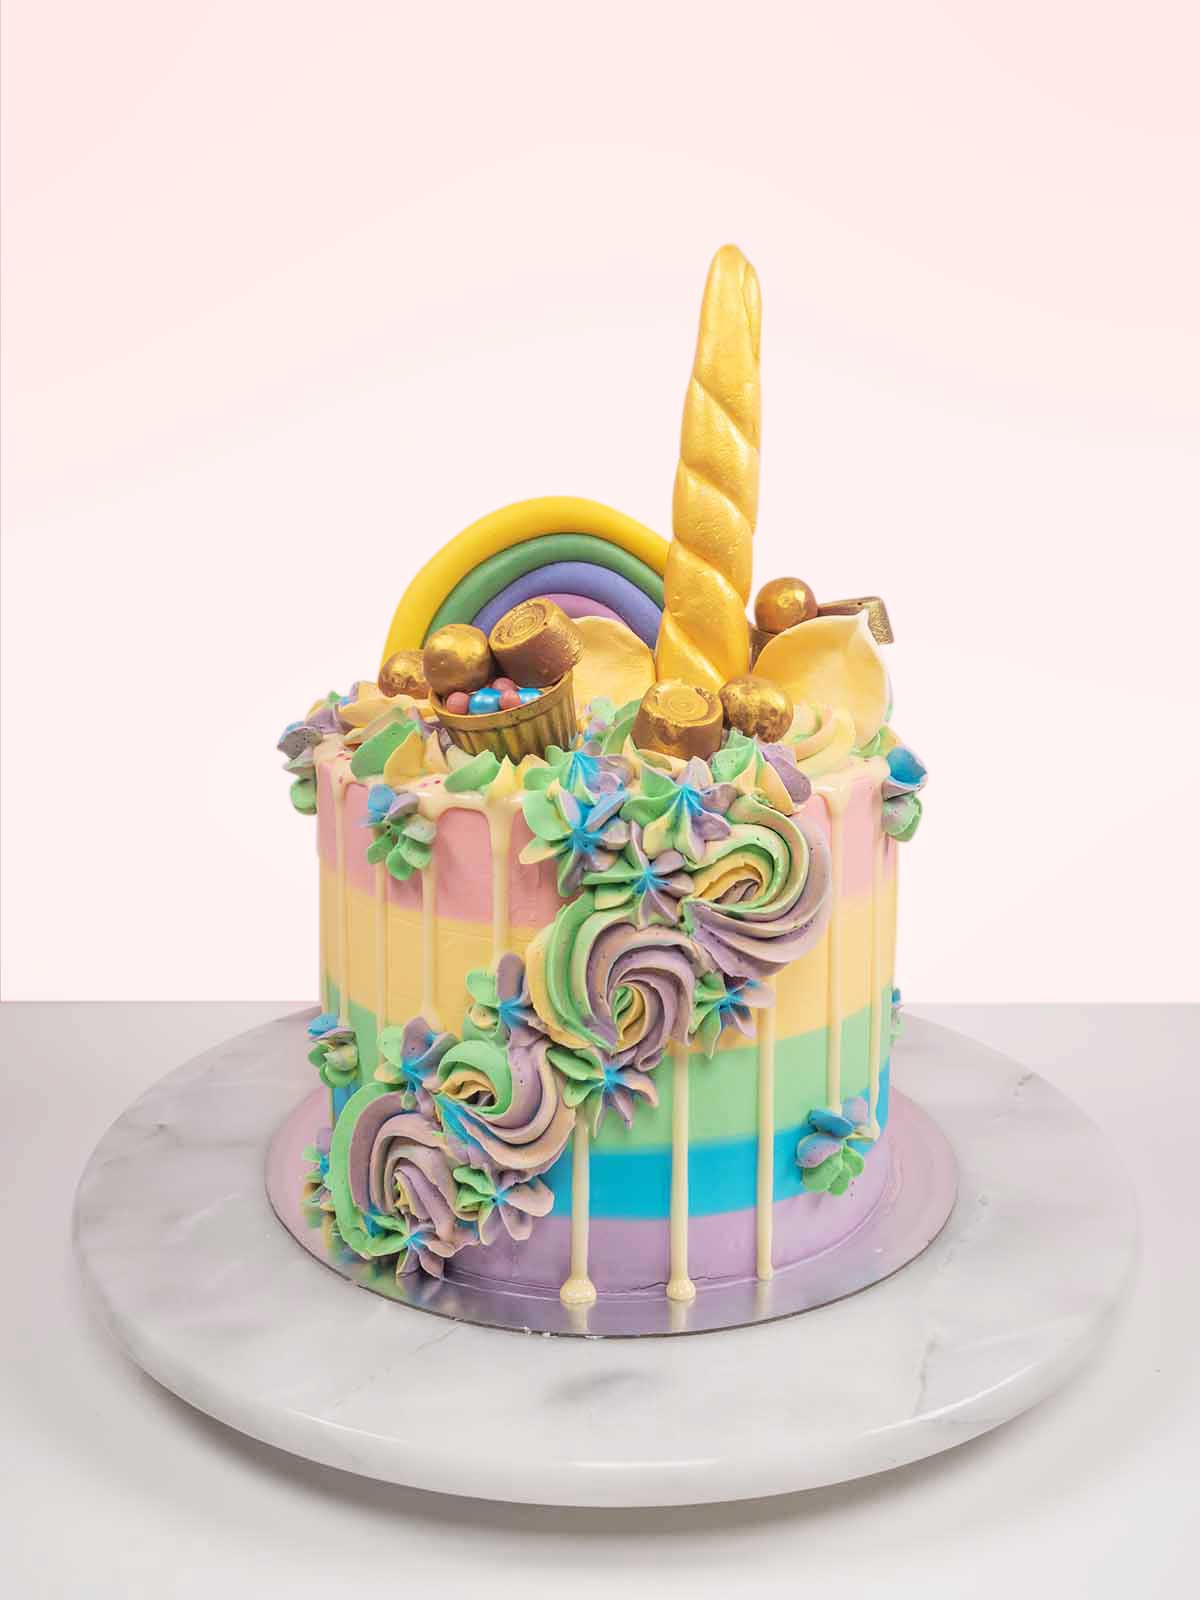 Unicorn Cakes Buy Online Quick Delivery - Dough and Cream